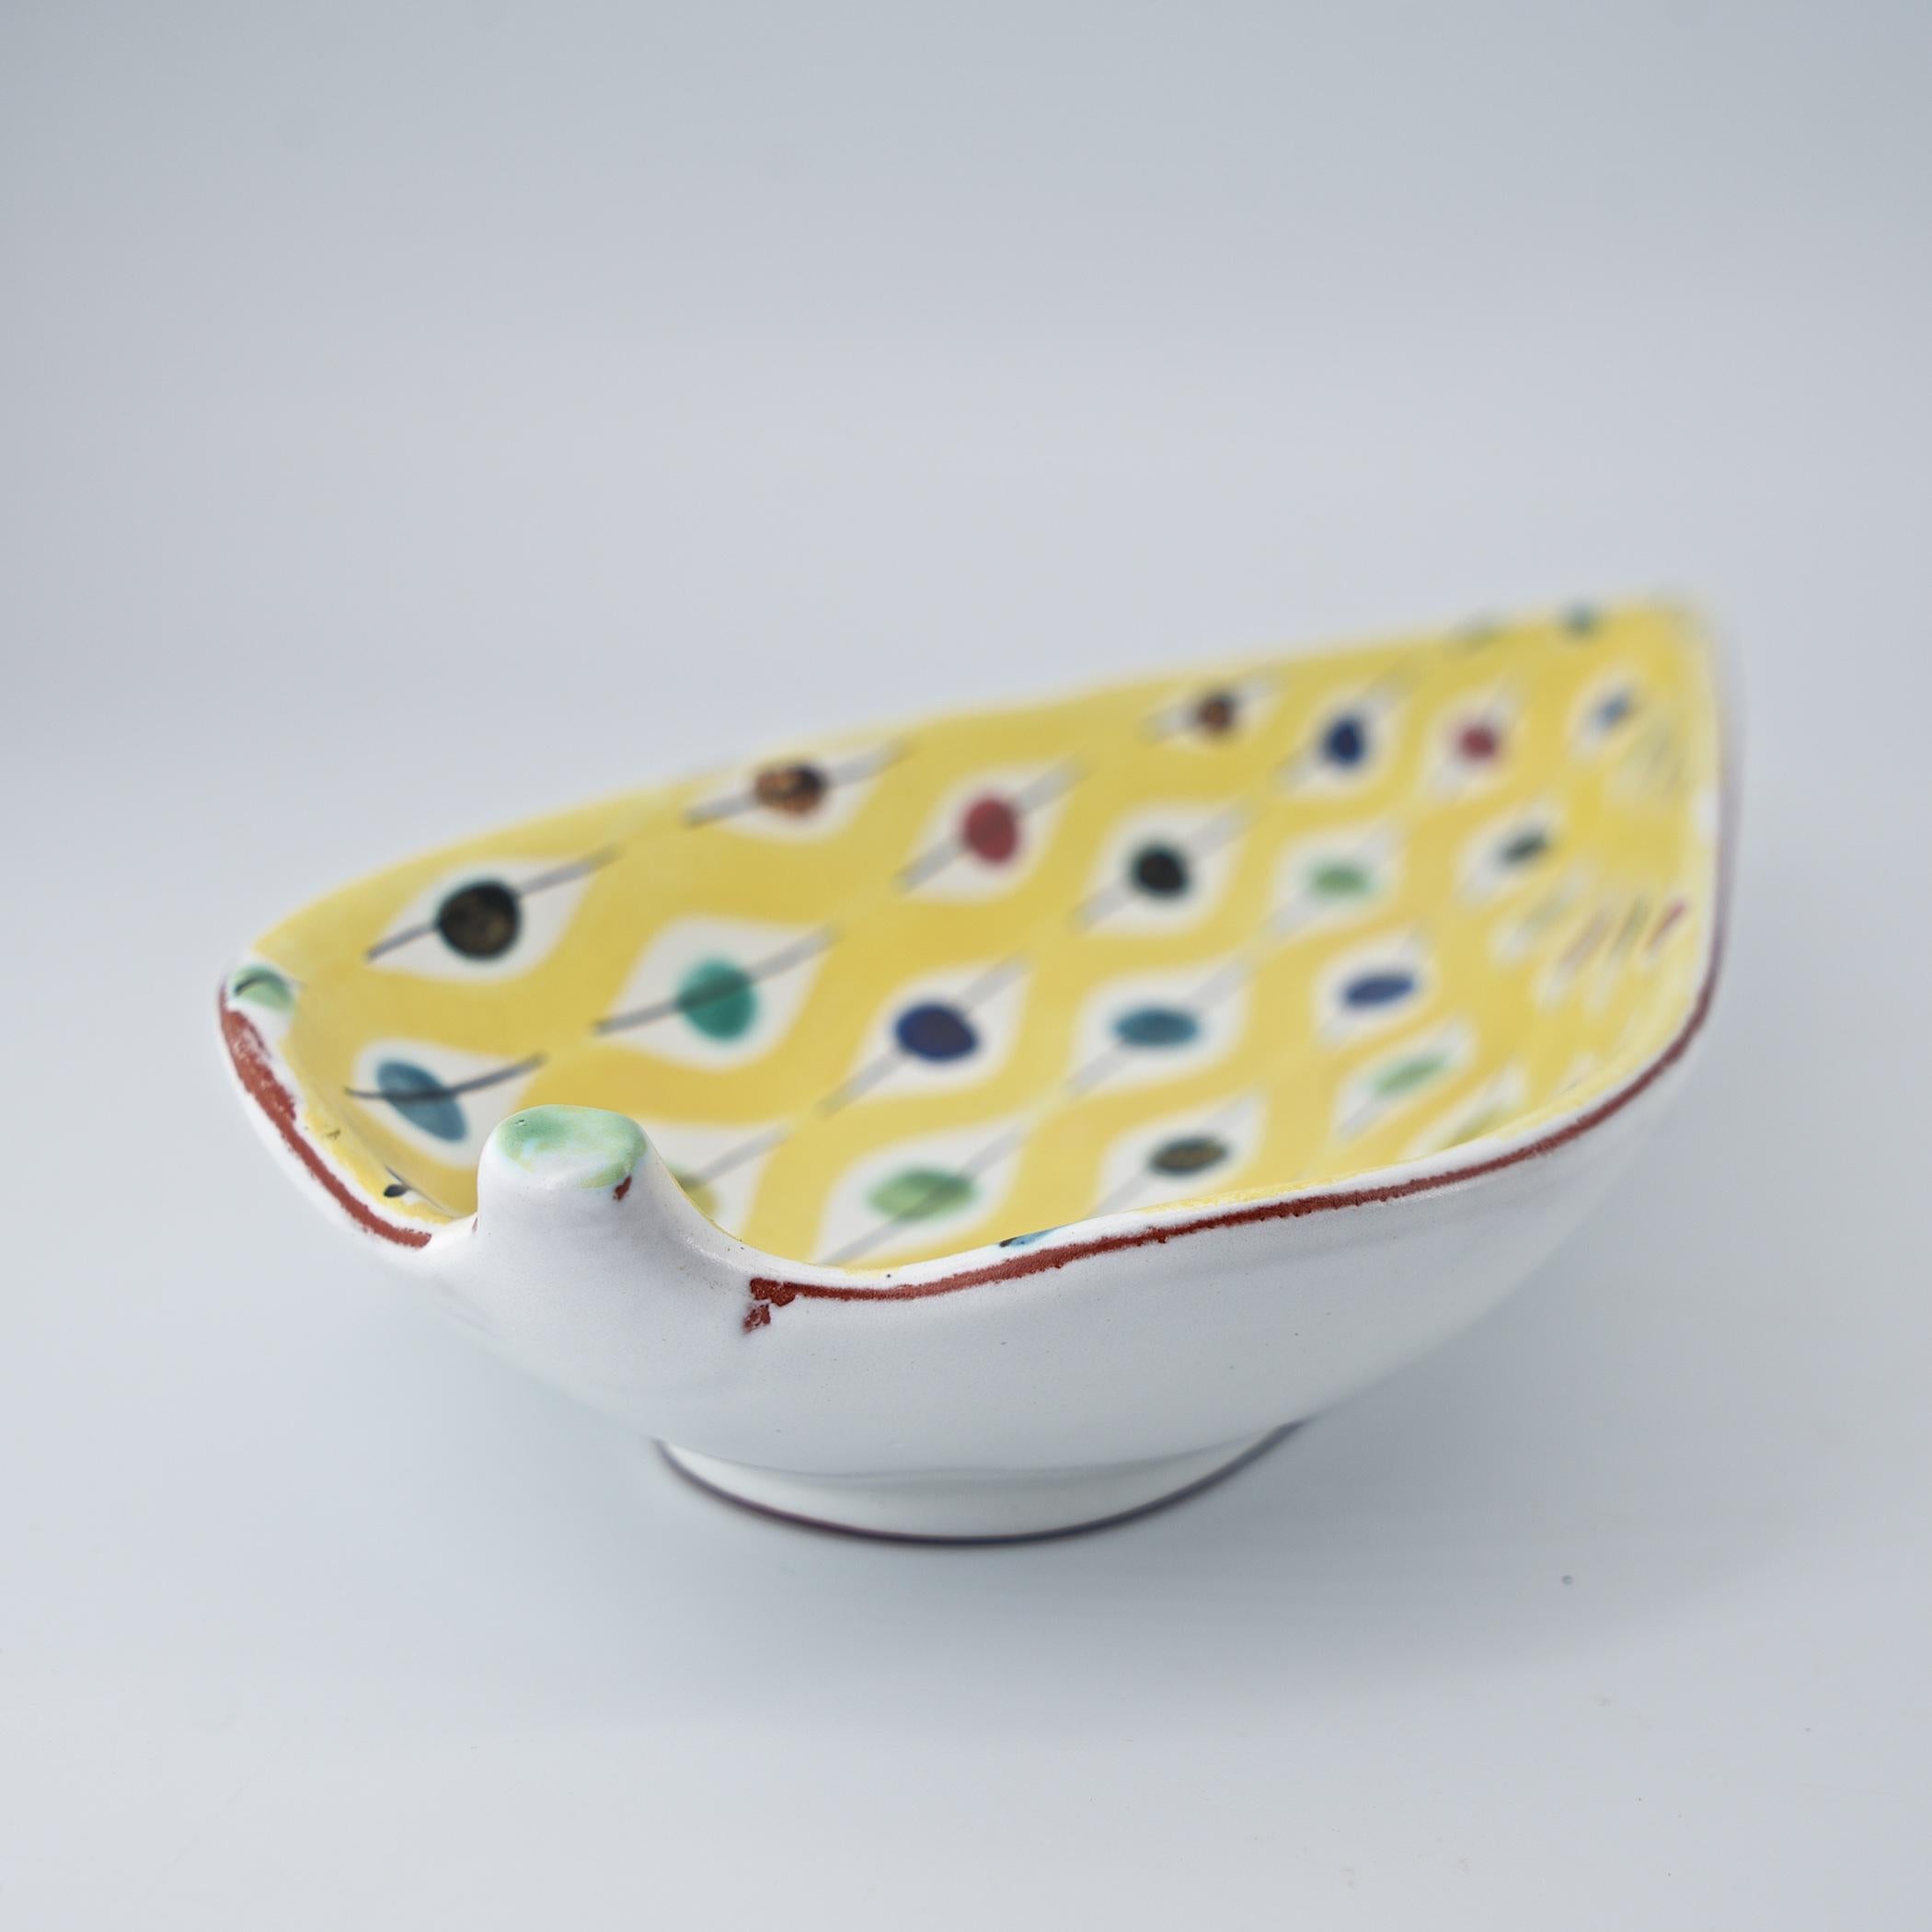 1950s Stig Lindberg Leaf Bowl Hand Painted Studio Pottery Sweden Polkadots In Good Condition For Sale In Hyattsville, MD